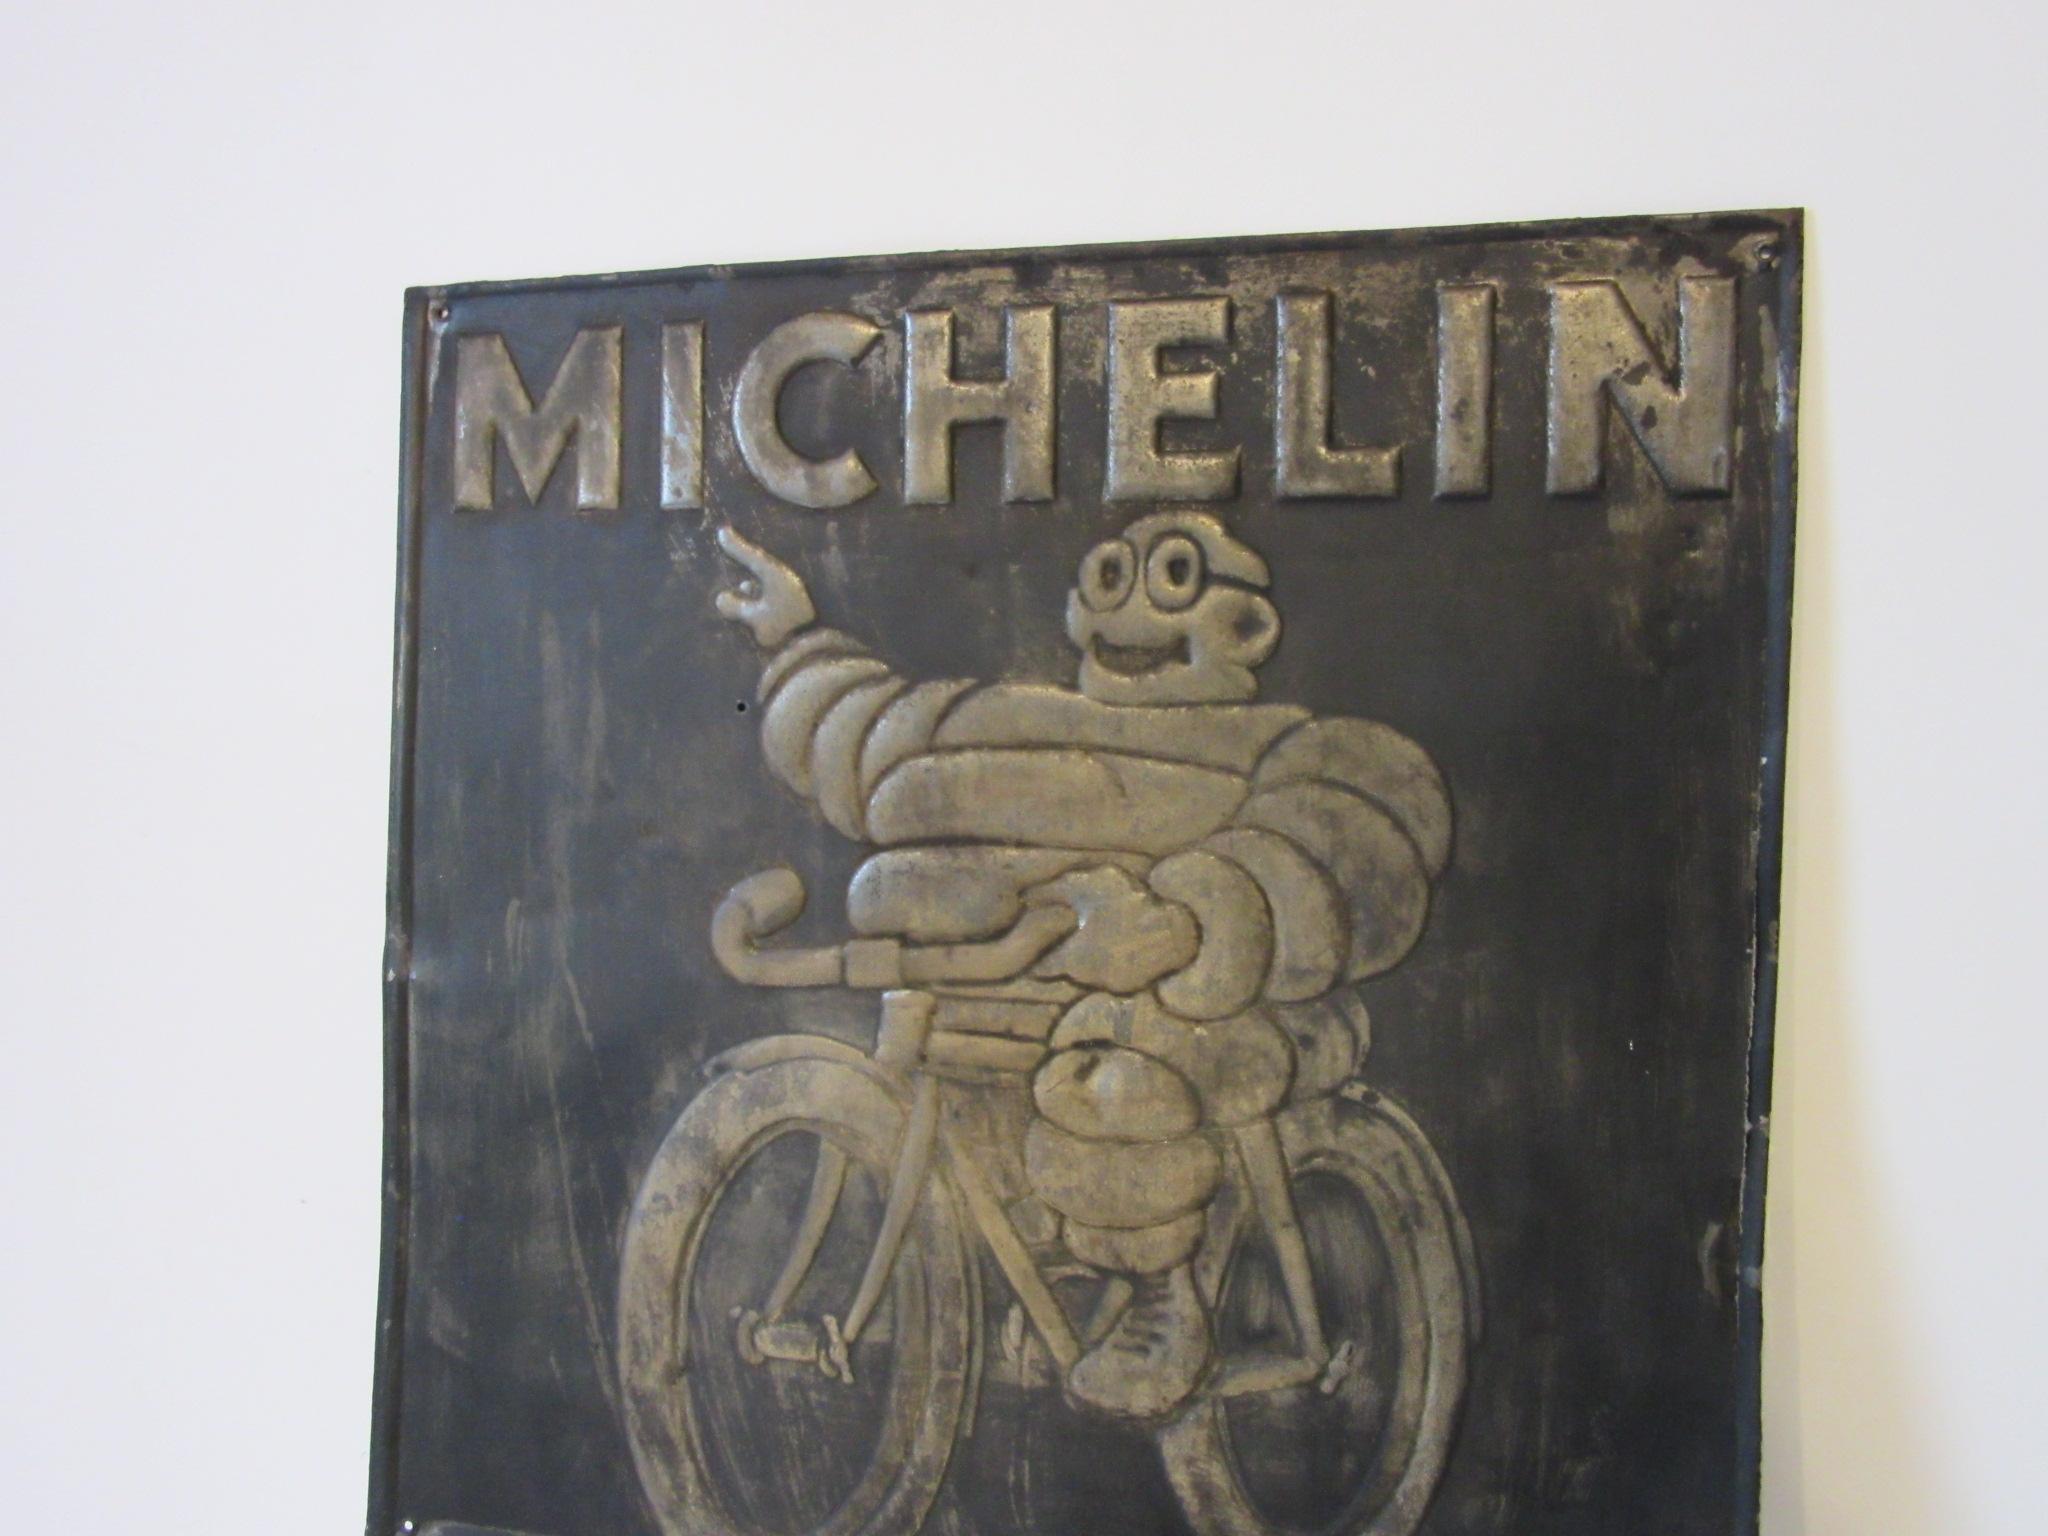 A vintage embossed metal Michelin tire advertising sign depicting the ever famous Bibendum or Michelin Tire man who is the mascot for the company and the worlds oldest trademark. Bibendum is pictured riding a bicycle and promoting the tire brand,